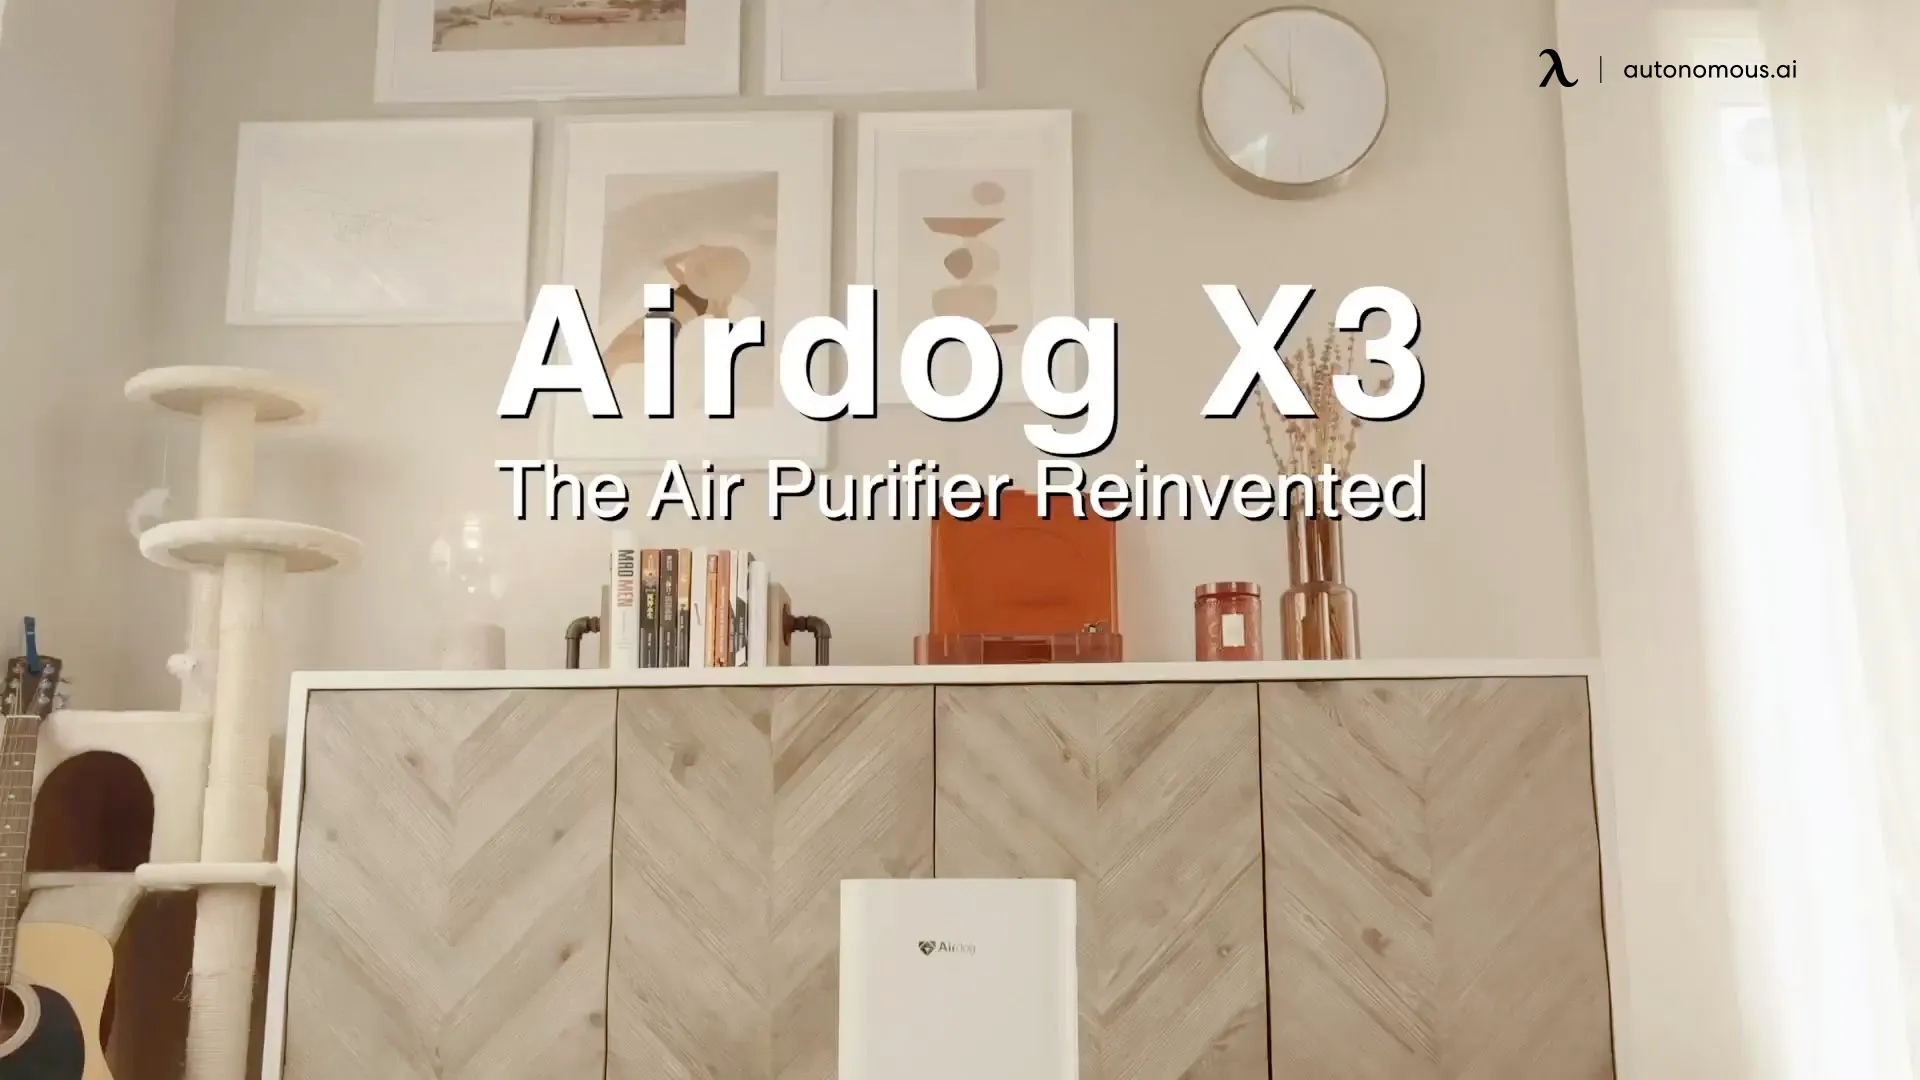 X3 Purifier from Airdog